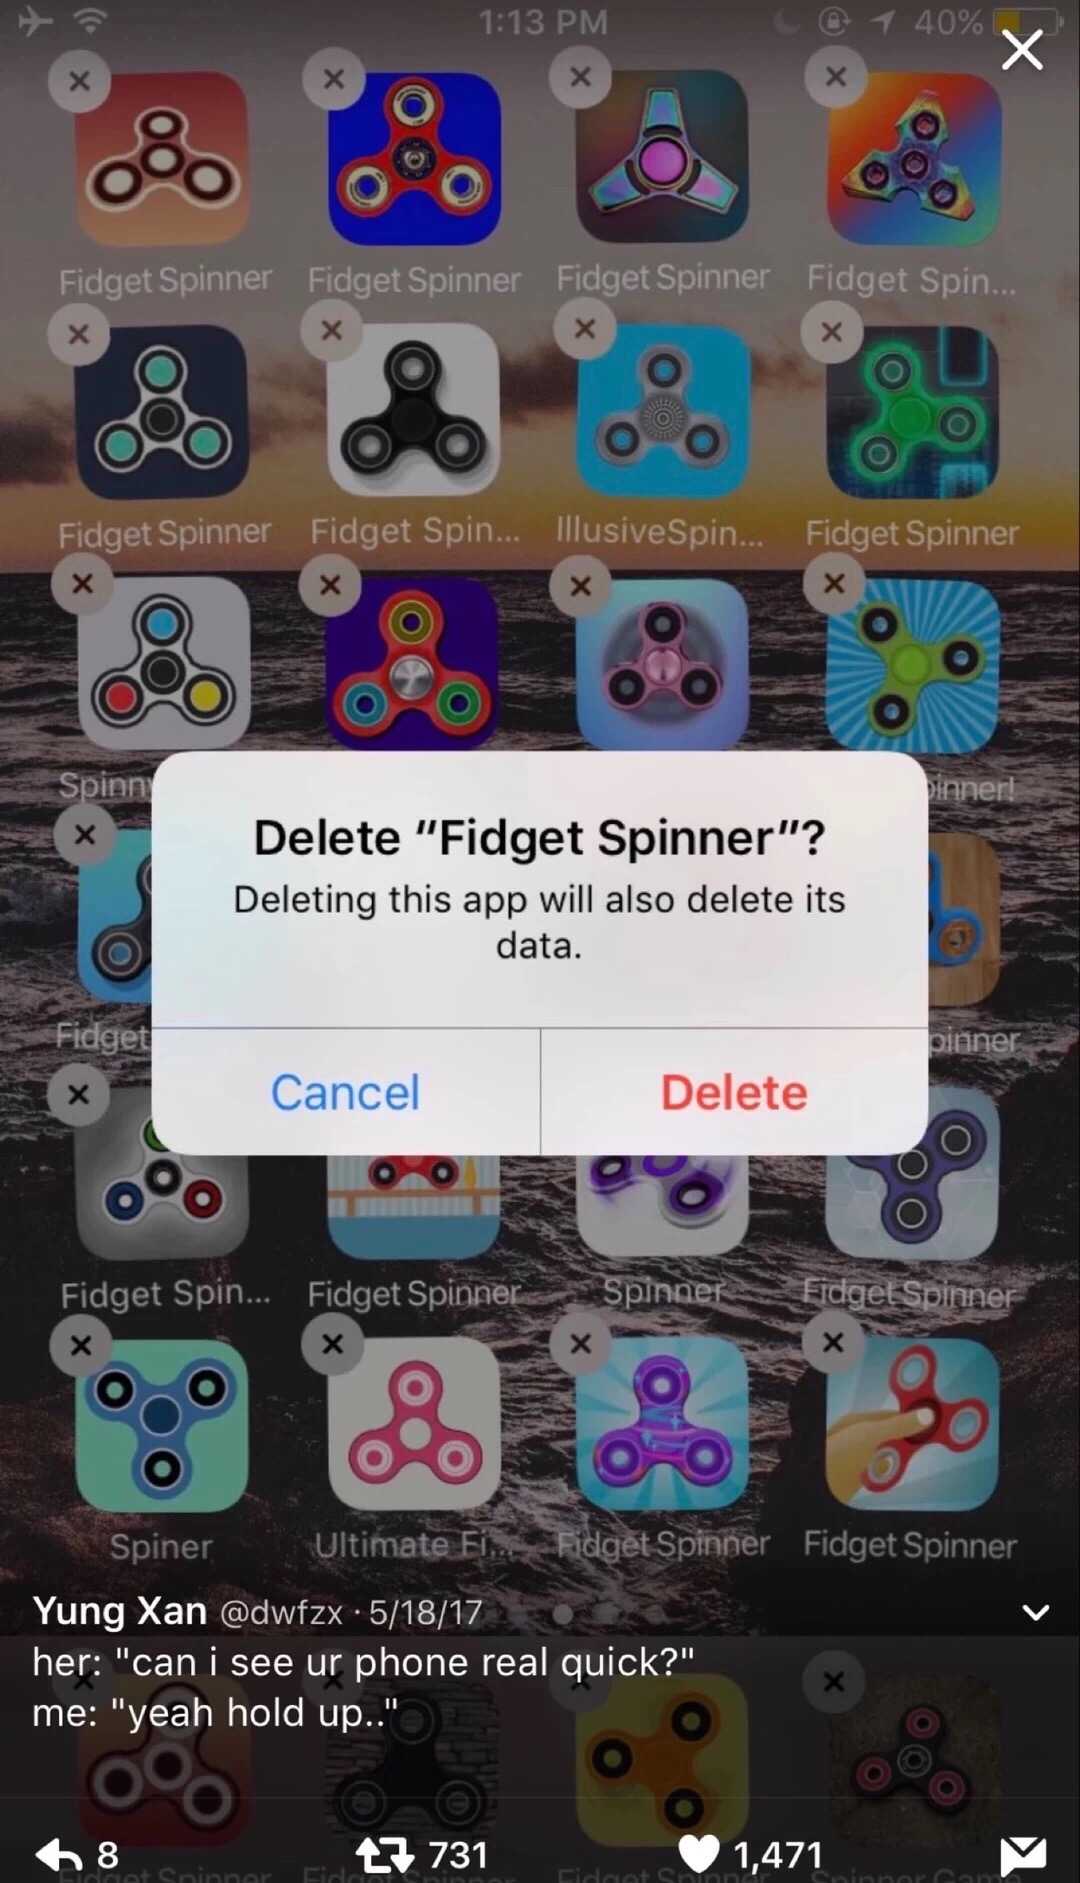 Deleting all your fidget spinner apps before someone can look at your phone.